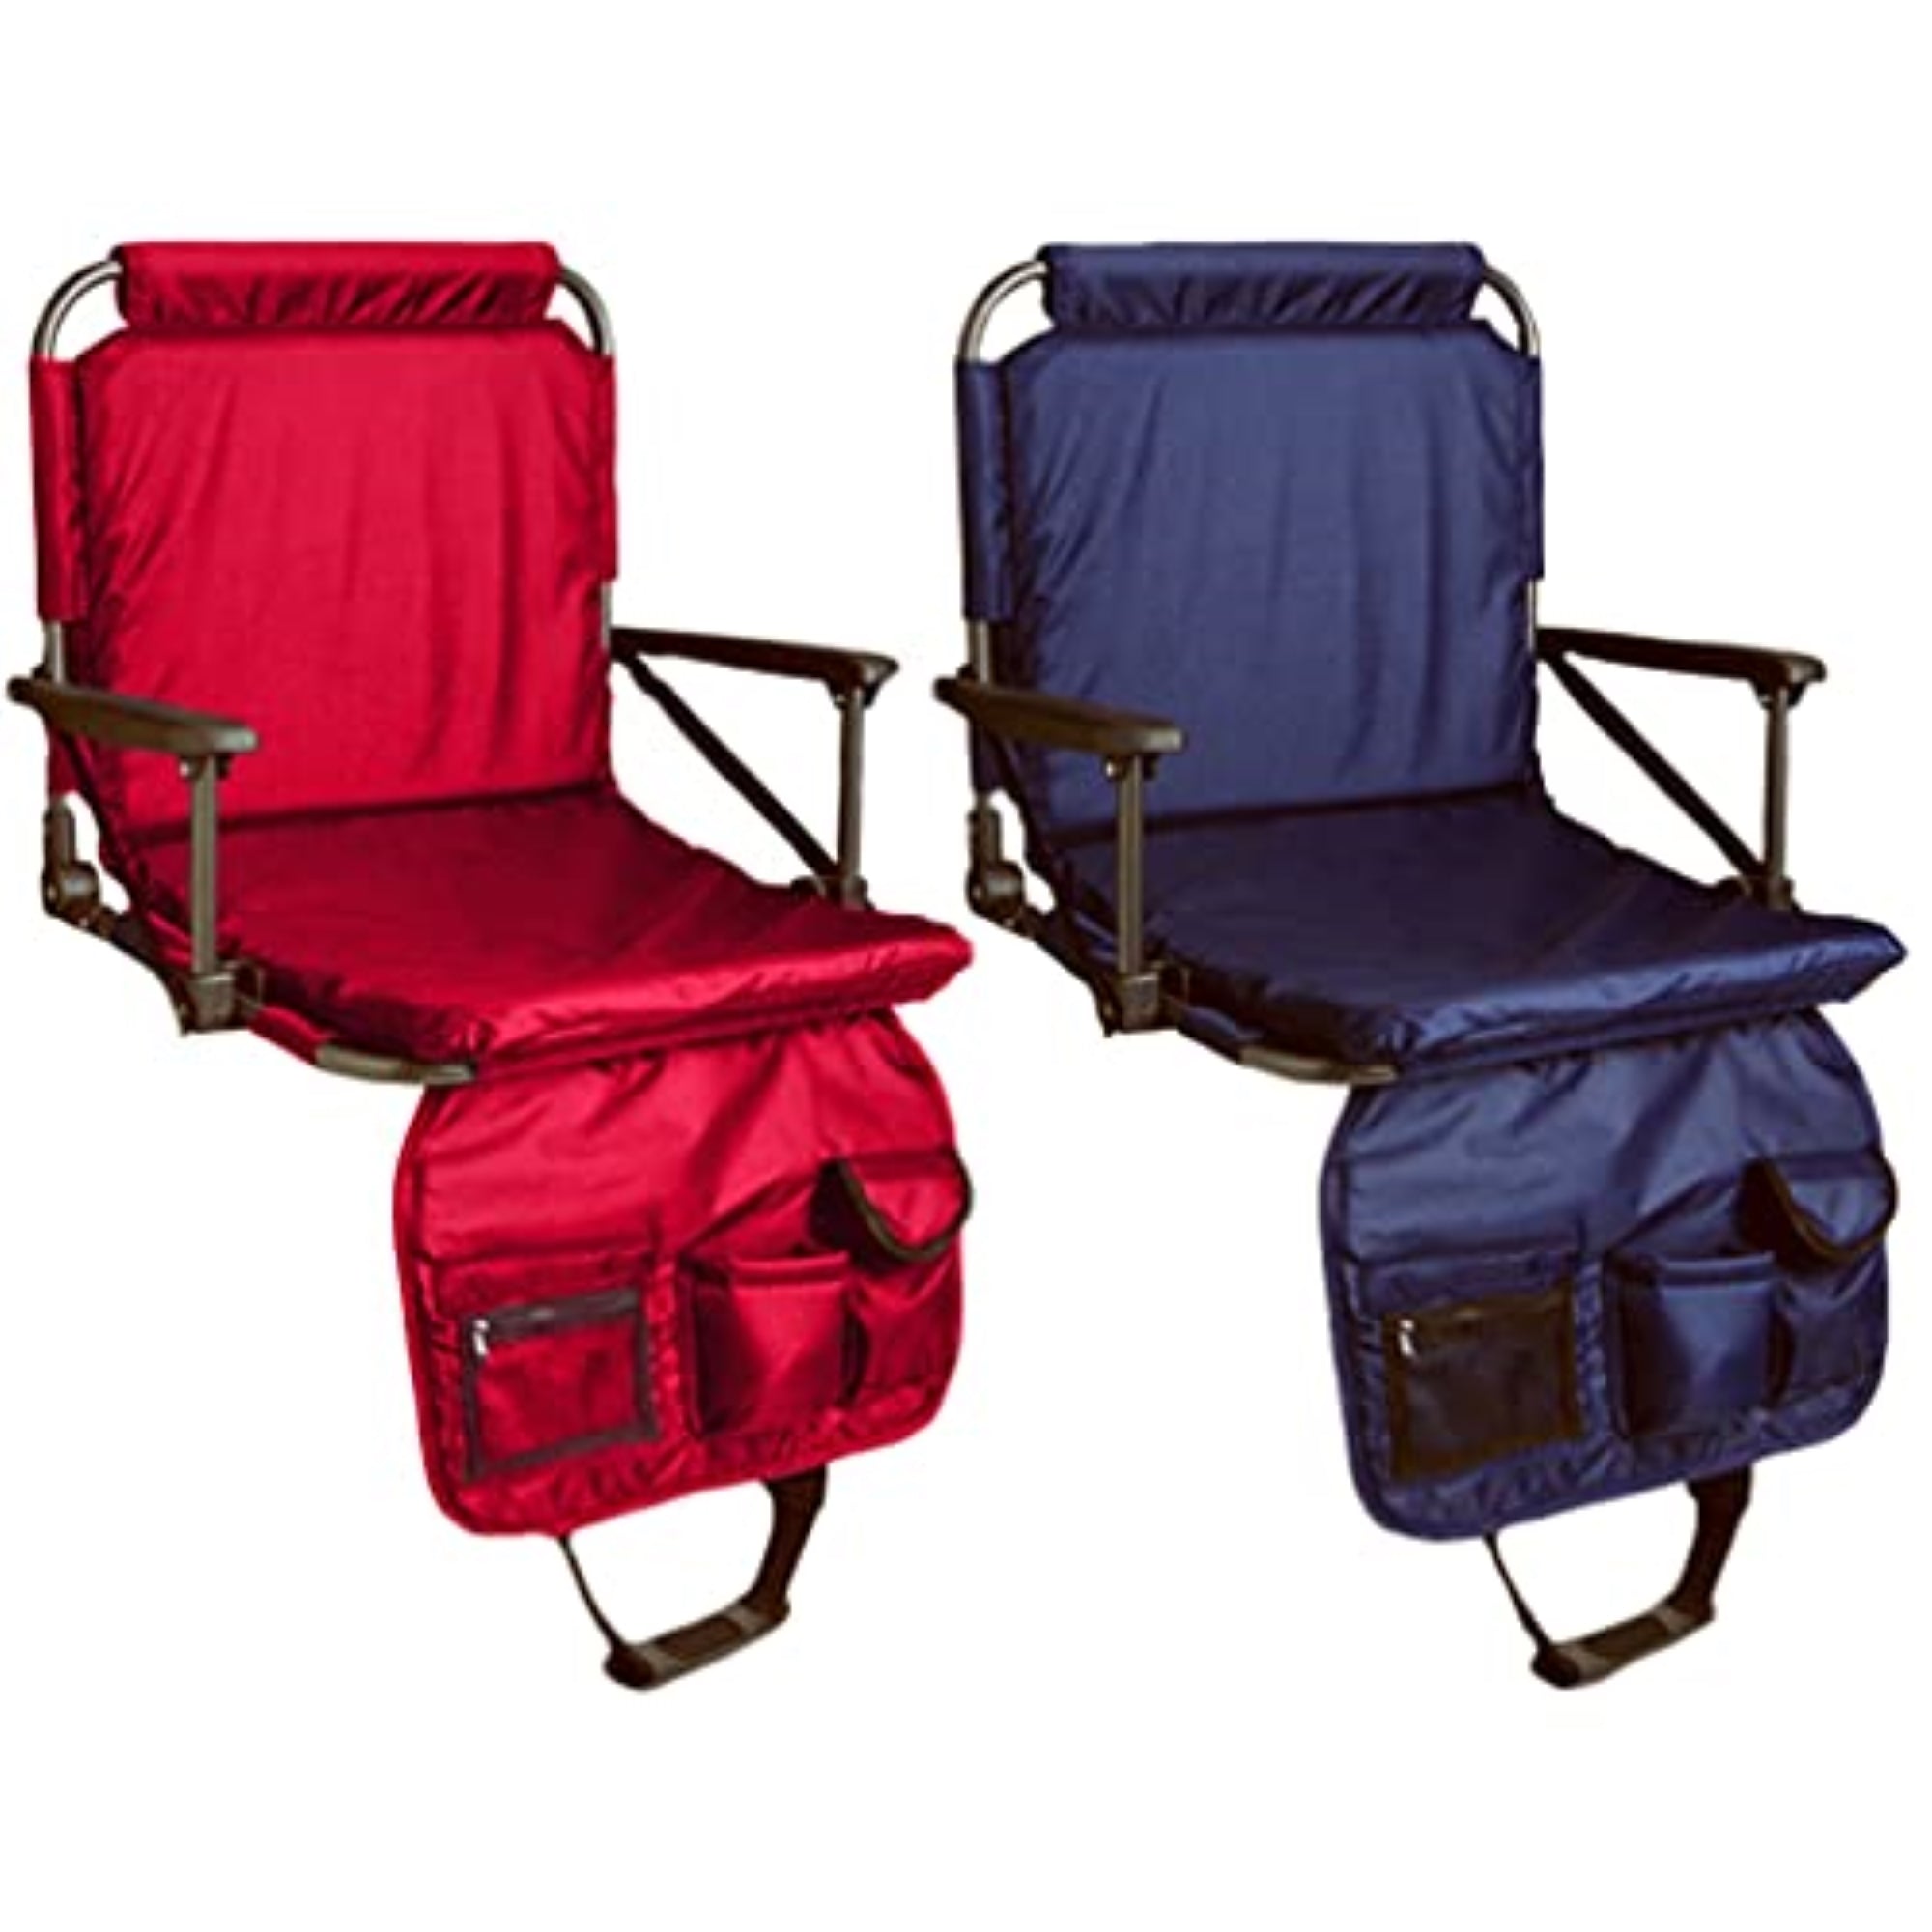 Zenithen Limited OC306S-TC01 FS Padded Stadium Seat, Assorted Colors (Pack of 2)